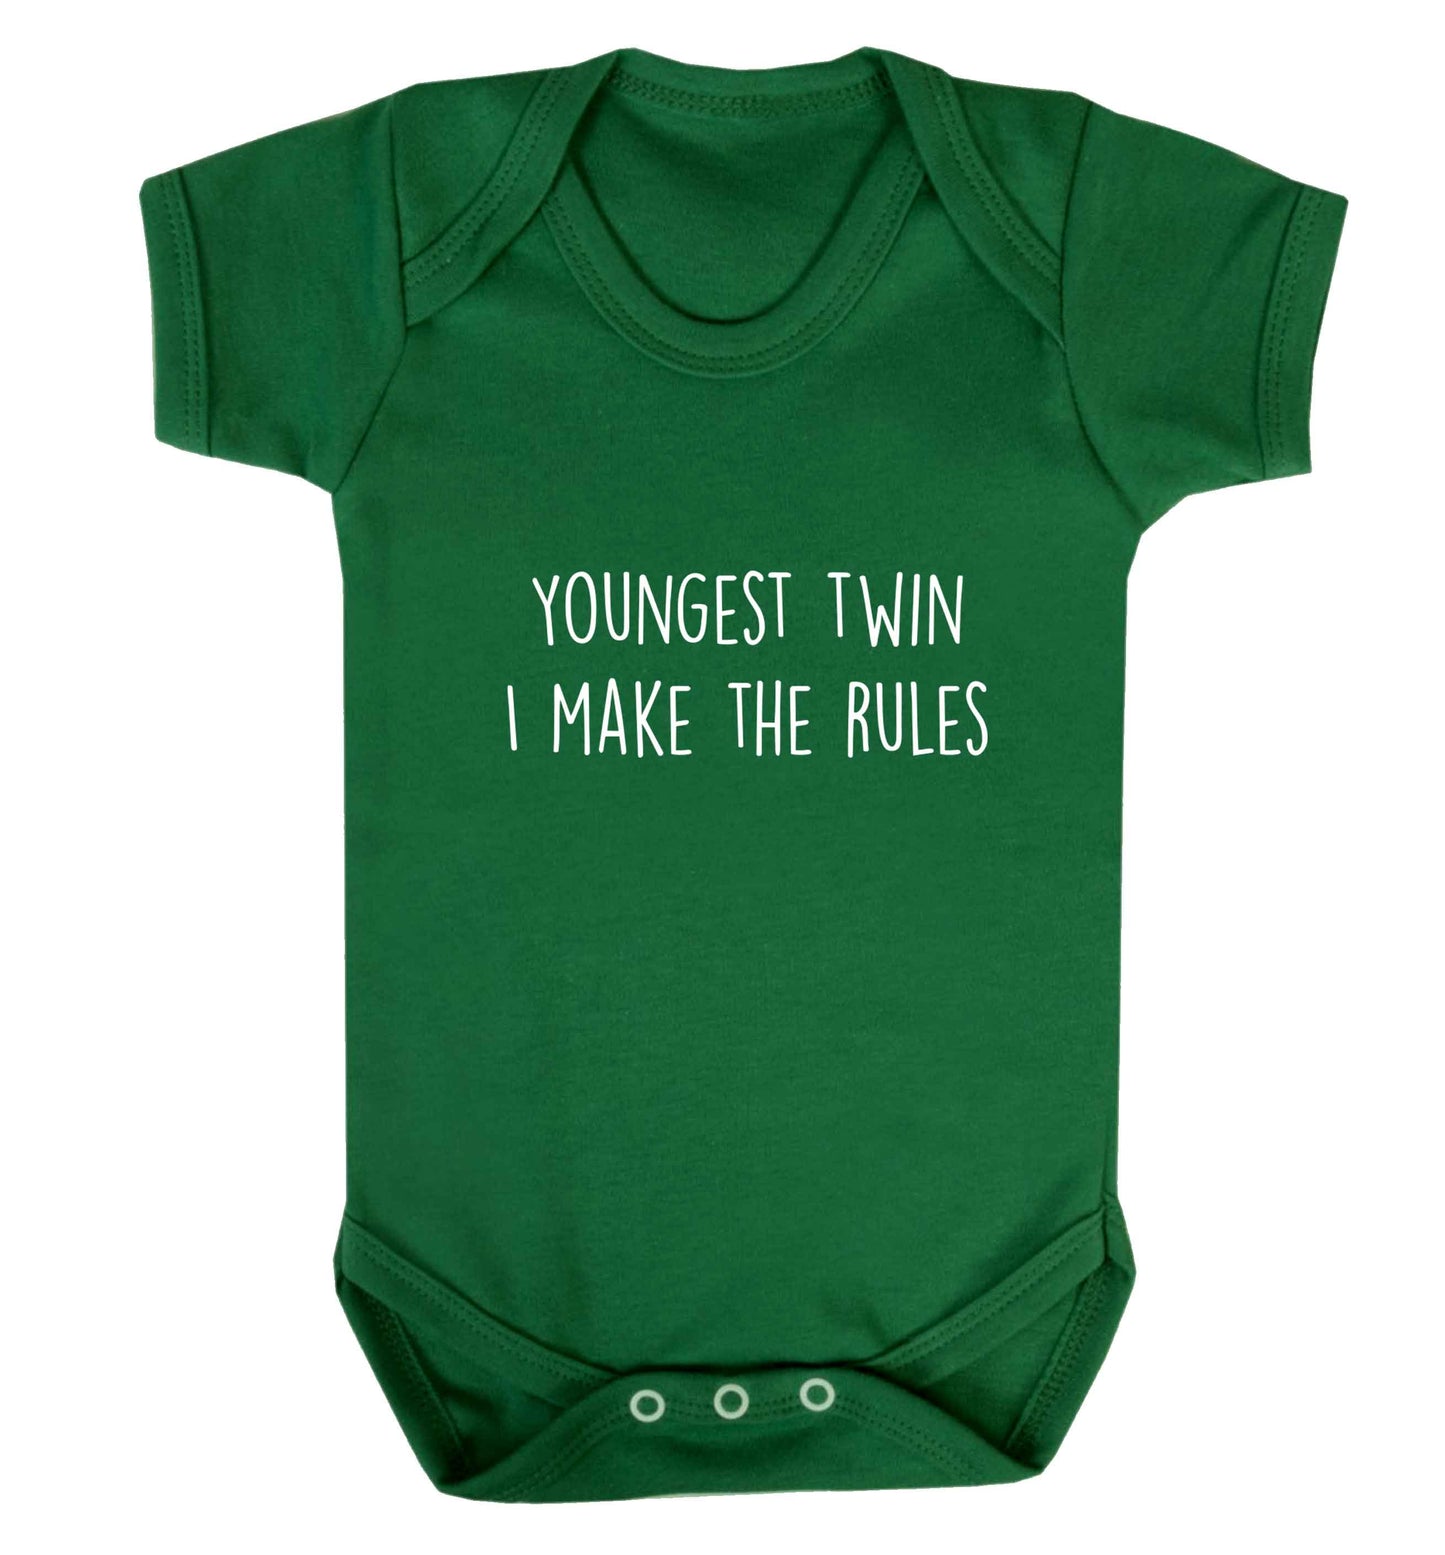 Youngest twin I make the rules baby vest green 18-24 months